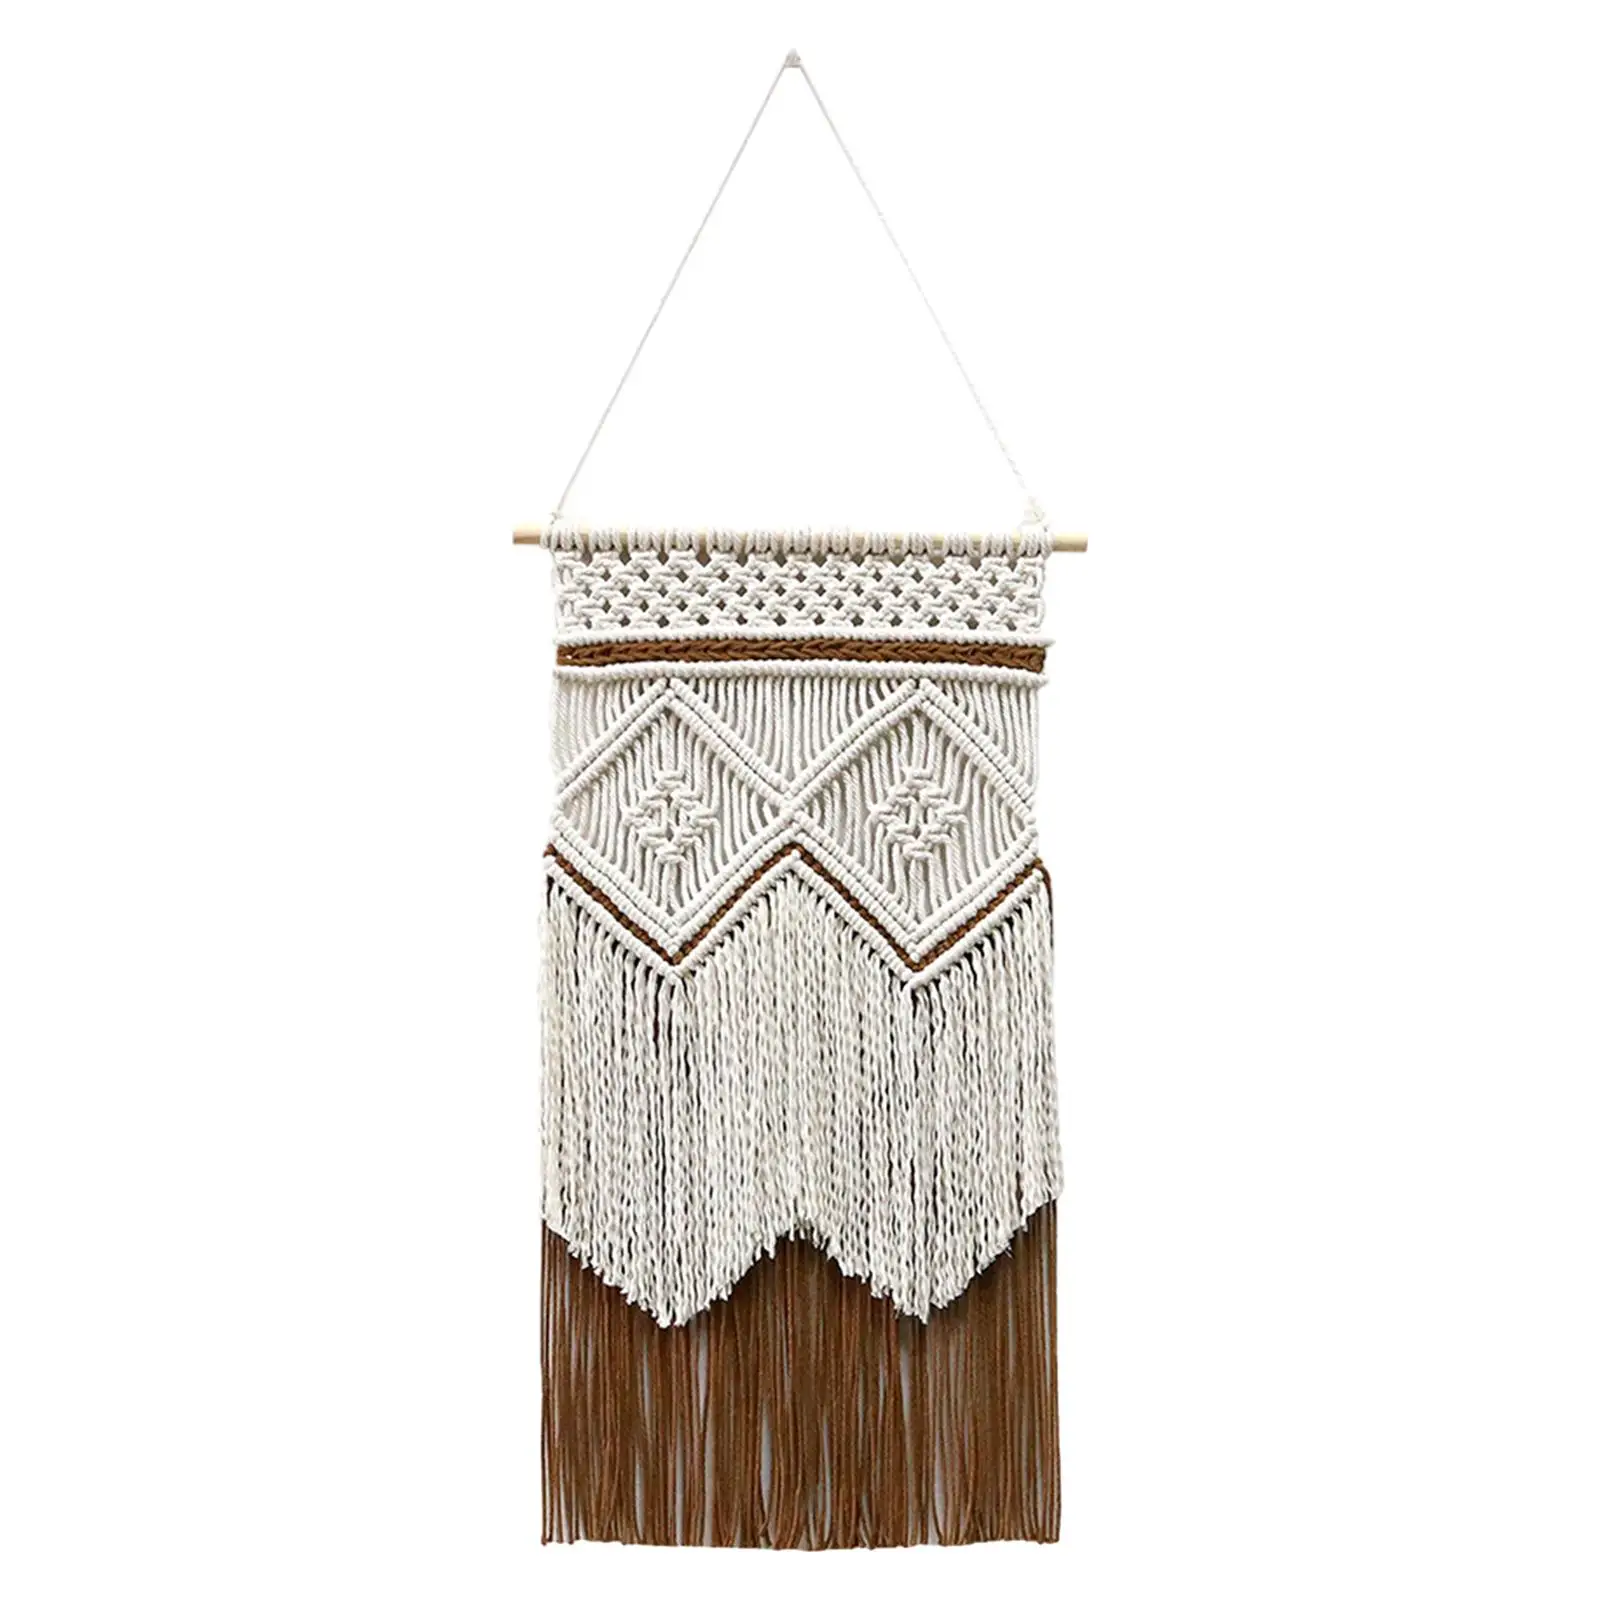 Hand Woven Tapestry Long Tassels Ornament Wall Hanging Tapestry Boho Macrame Tapestry for Dorm Apartment Nursery Wedding Bedroom